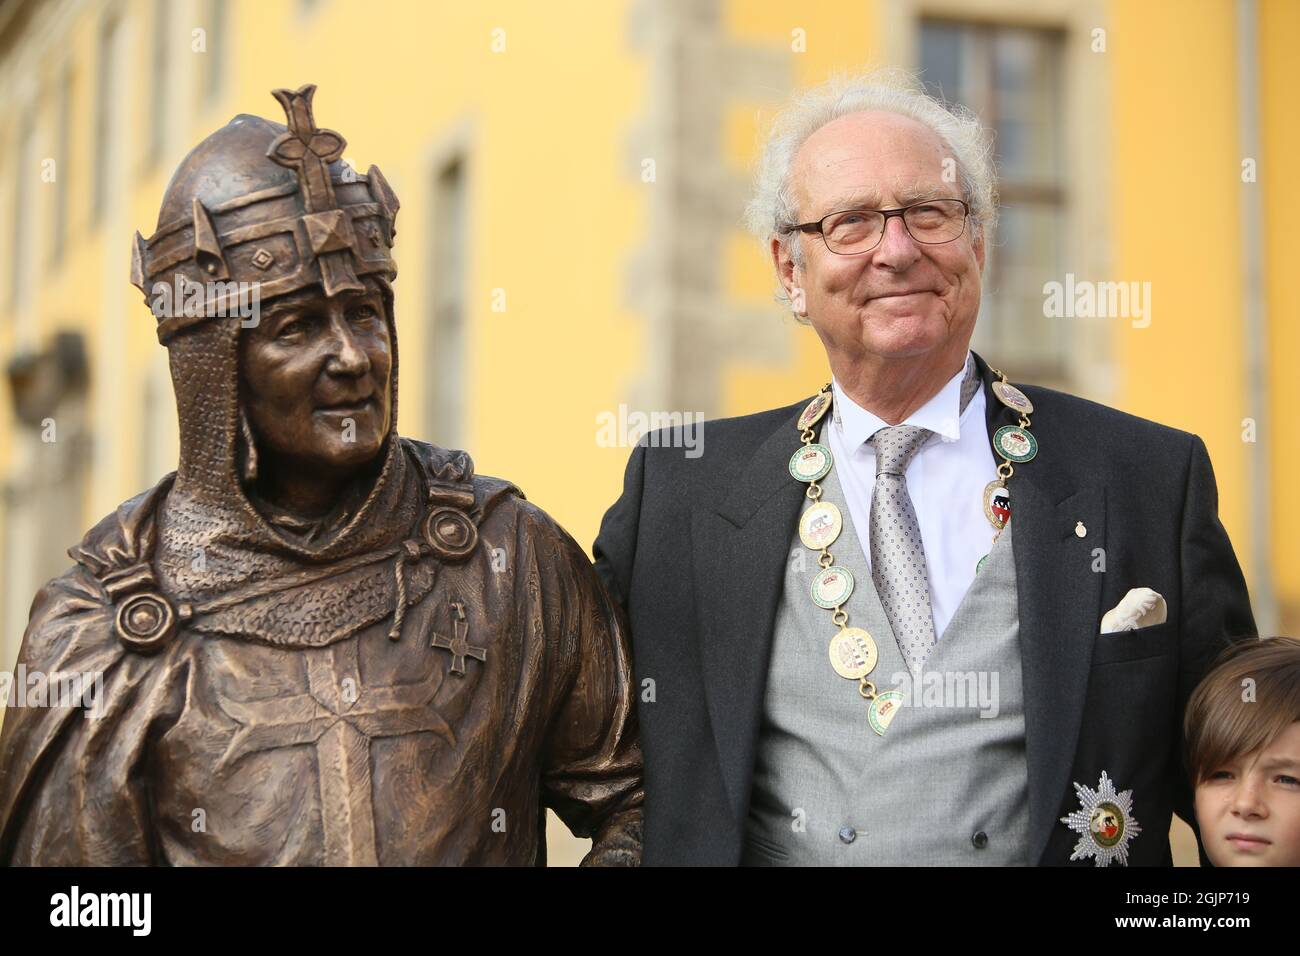 Ballenstedt, Germany. 11th Sep, 2021. Eduard Prince of Anhalt stands by a sculpture of Albrecht the Bear, Count of Ballenstedt, in the castle courtyard. As part of the ceremonial investiture, new members of the Order of the Ascanian House of Albrecht the Bear are admitted here. The investiture is in memory of Duke Joachim Ernst, the father of Prince Eduard of Anhalt. Credit: Matthias Bein/dpa-Zentralbild/ZB/dpa/Alamy Live News Stock Photo